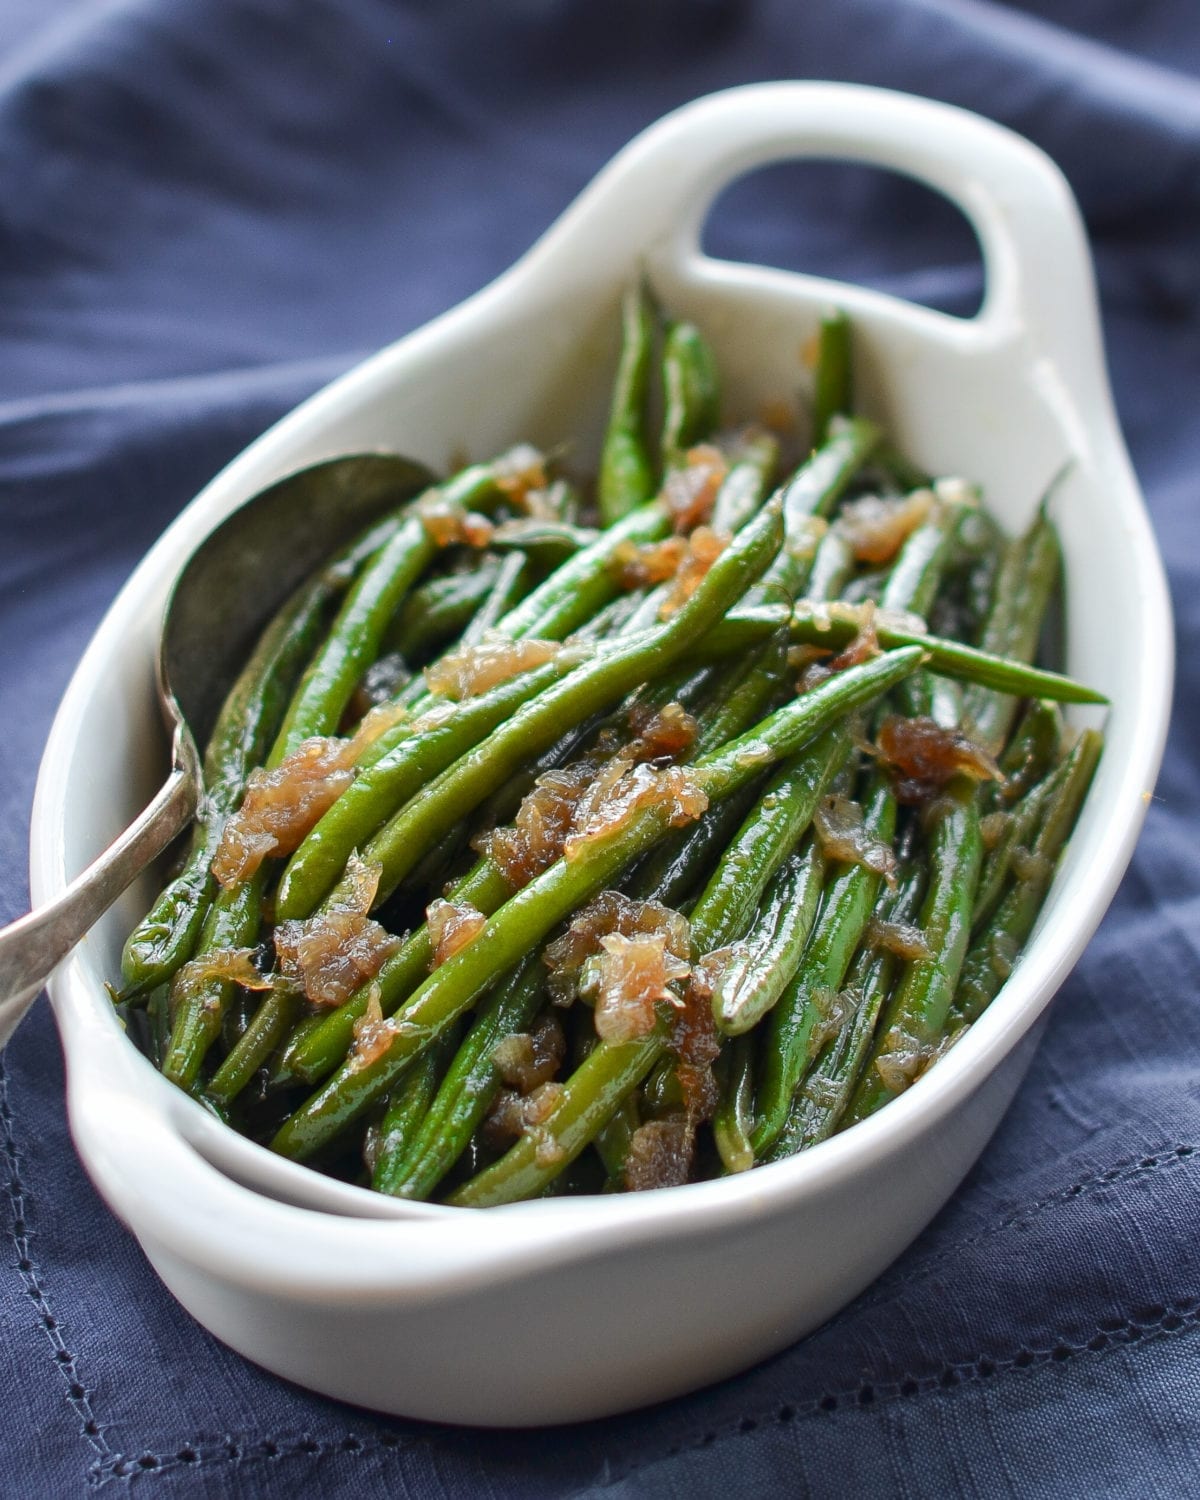 Dish of French green beans with shallots.